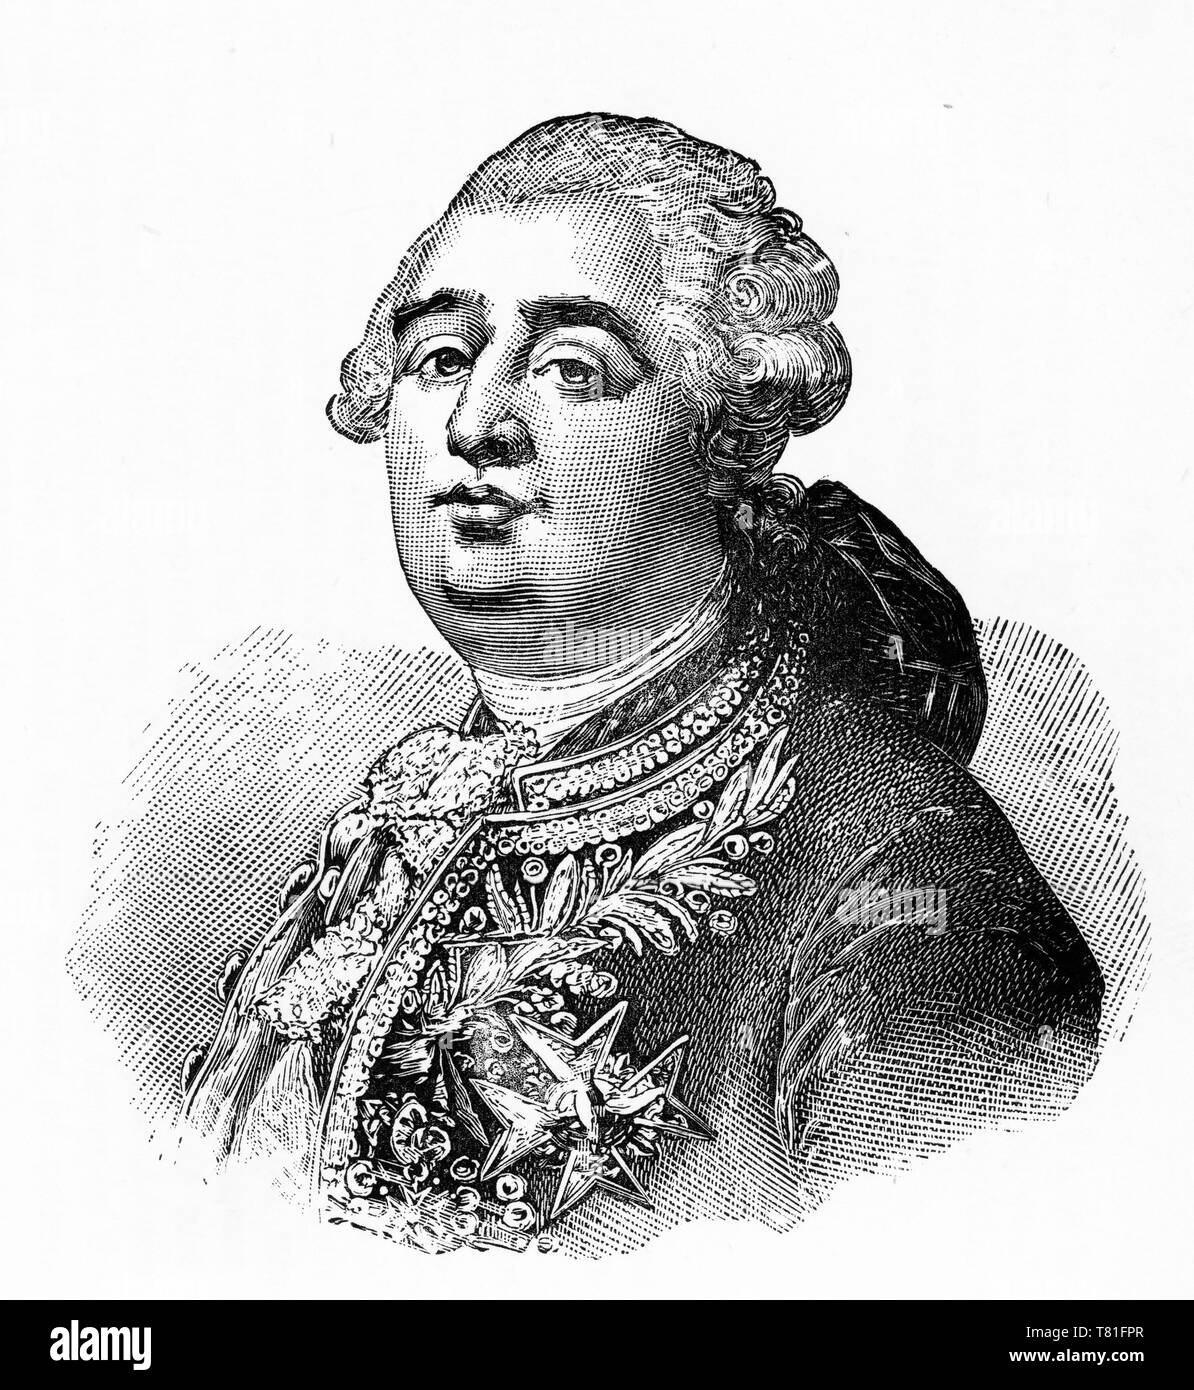 Engraving of Louis XVI (1754 â€“ 1793), born Louis-Auguste, last King of France before the fall of the monarchy during the French Revolution. He was called Citizen Louis Capet during the months before he was guillotined. Stock Photo